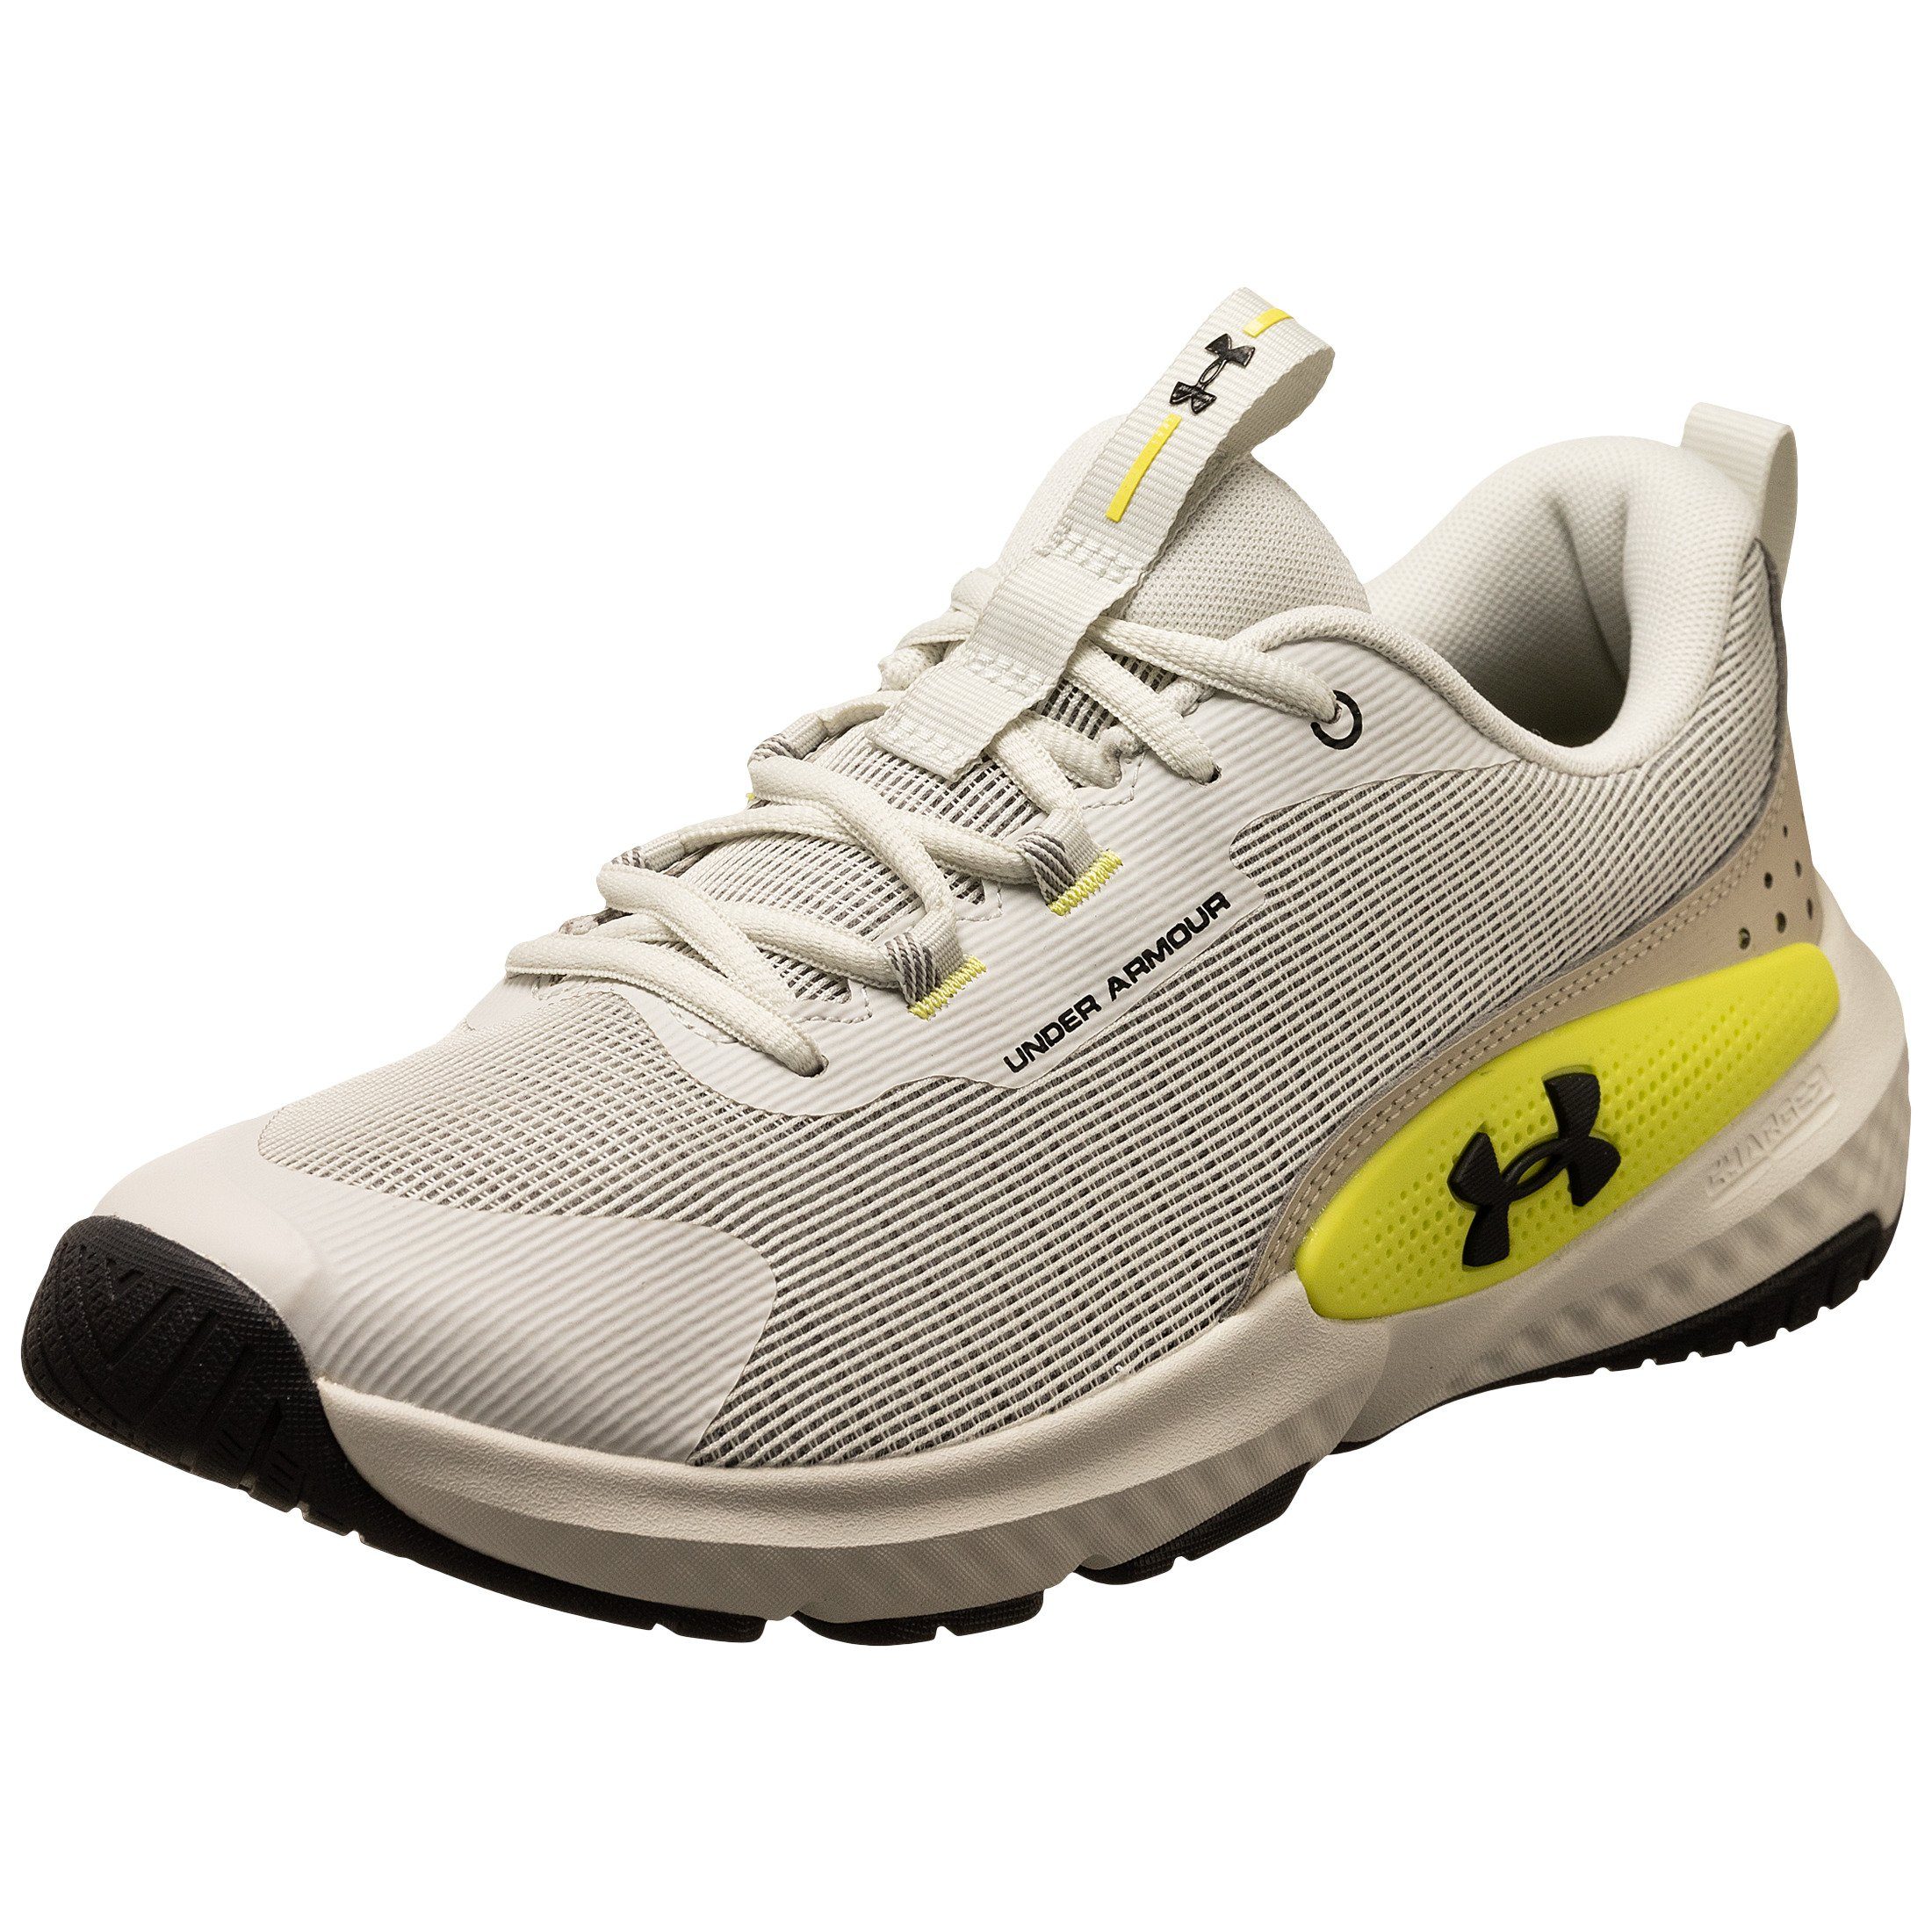 Under Armour® Dynamic Select Trainingsschuh Мужчинам Trainingsschuh